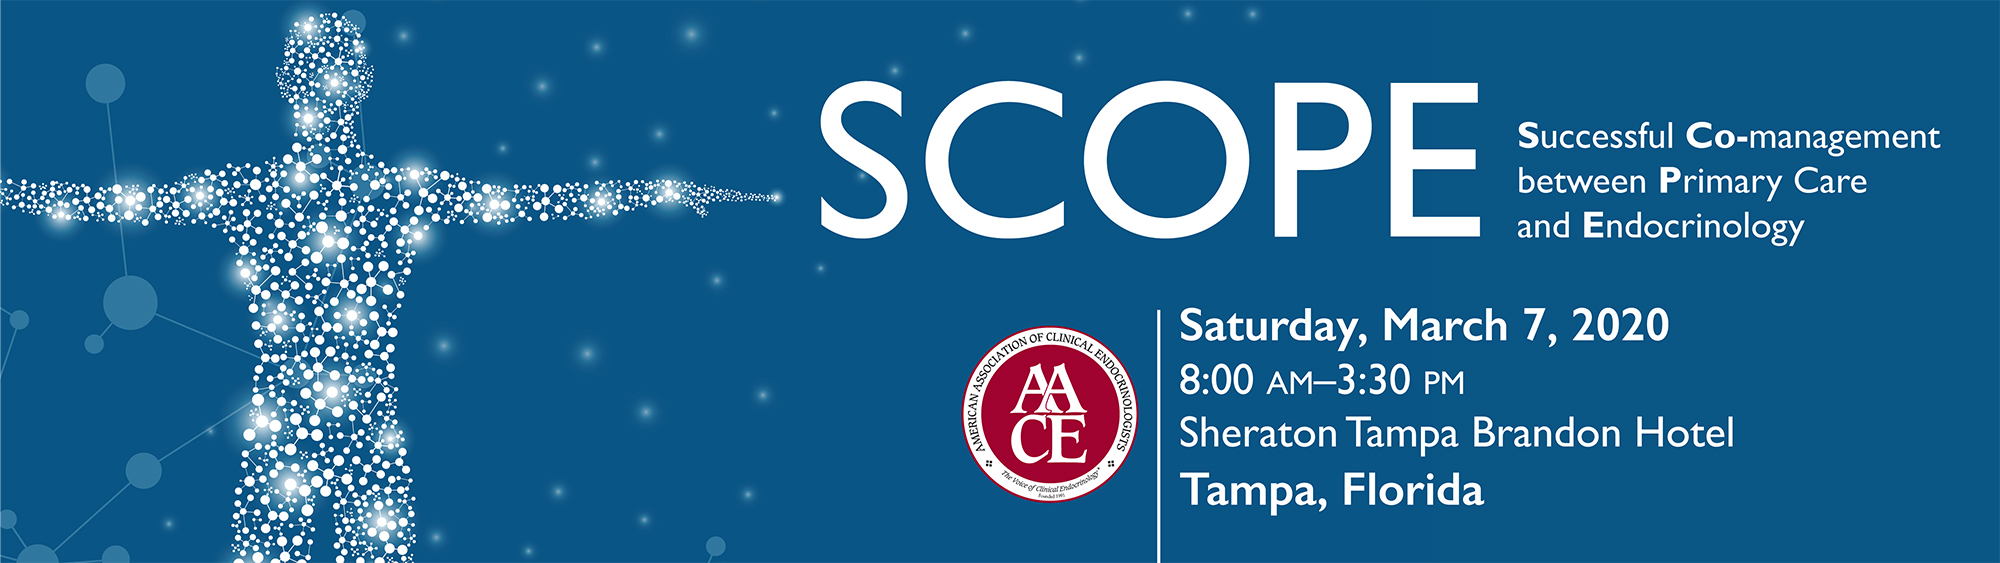 SCOPE: Successful CO-Management between Primary Care and Endocrinology (TAMPA)